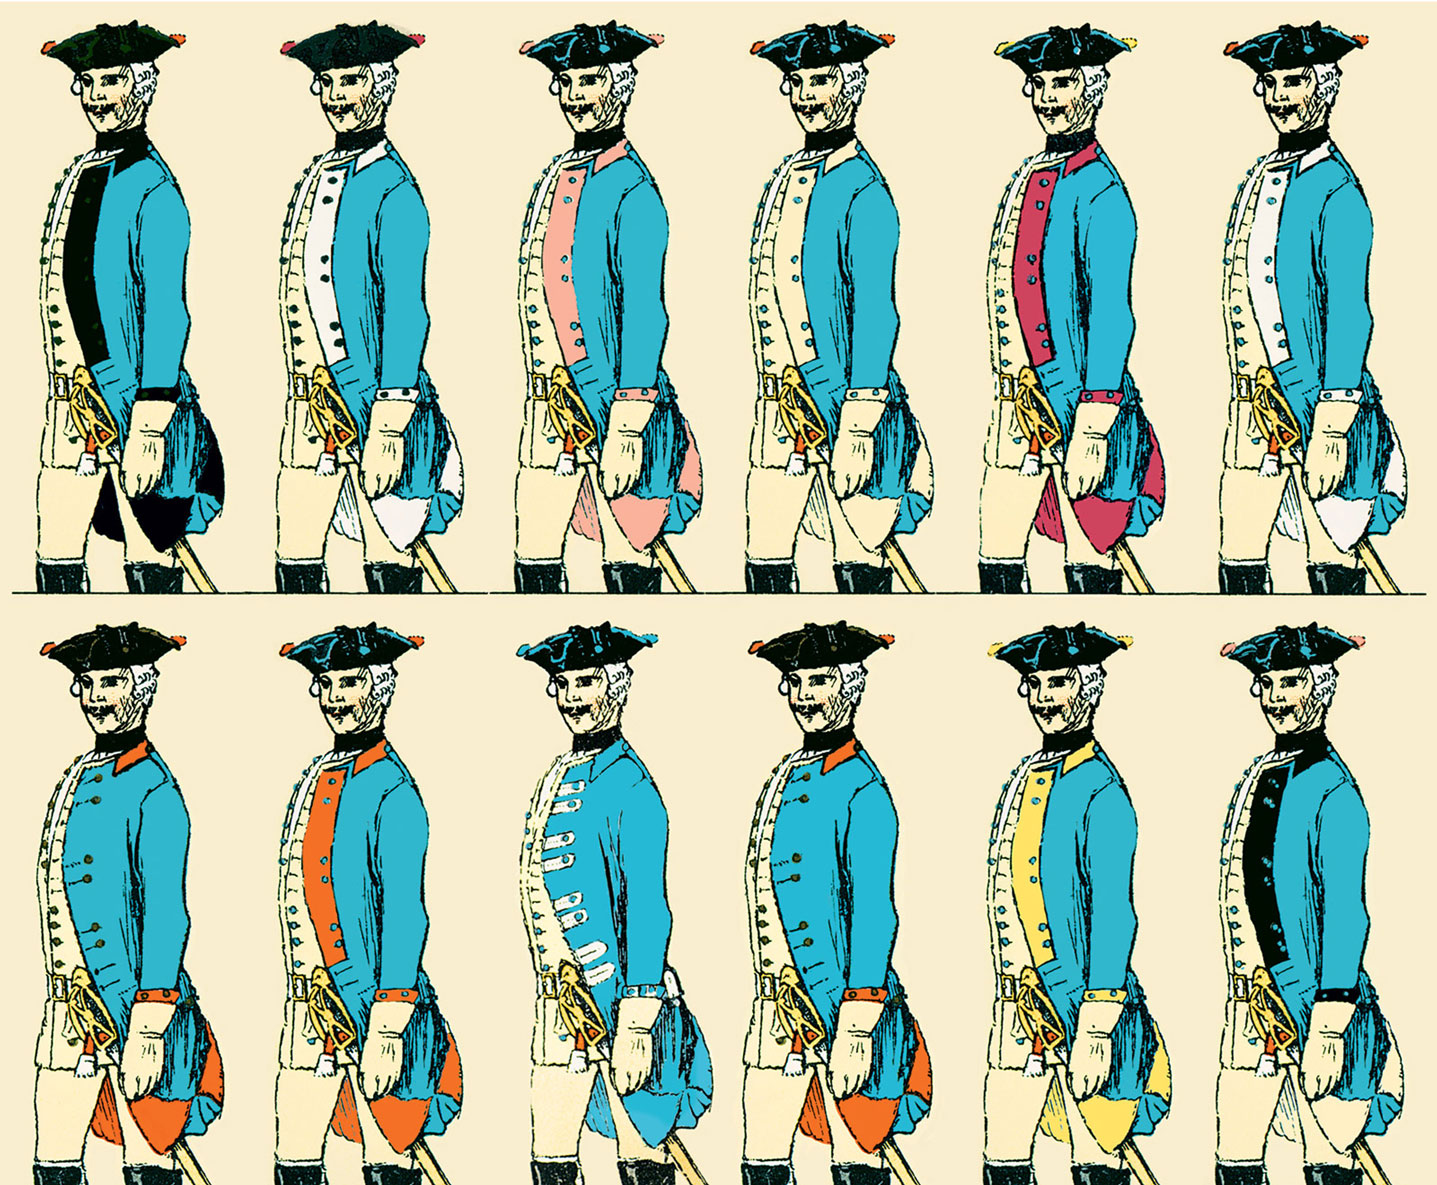 An undated drawing for a guide to Prussian military uniforms from 1746 to 1756.